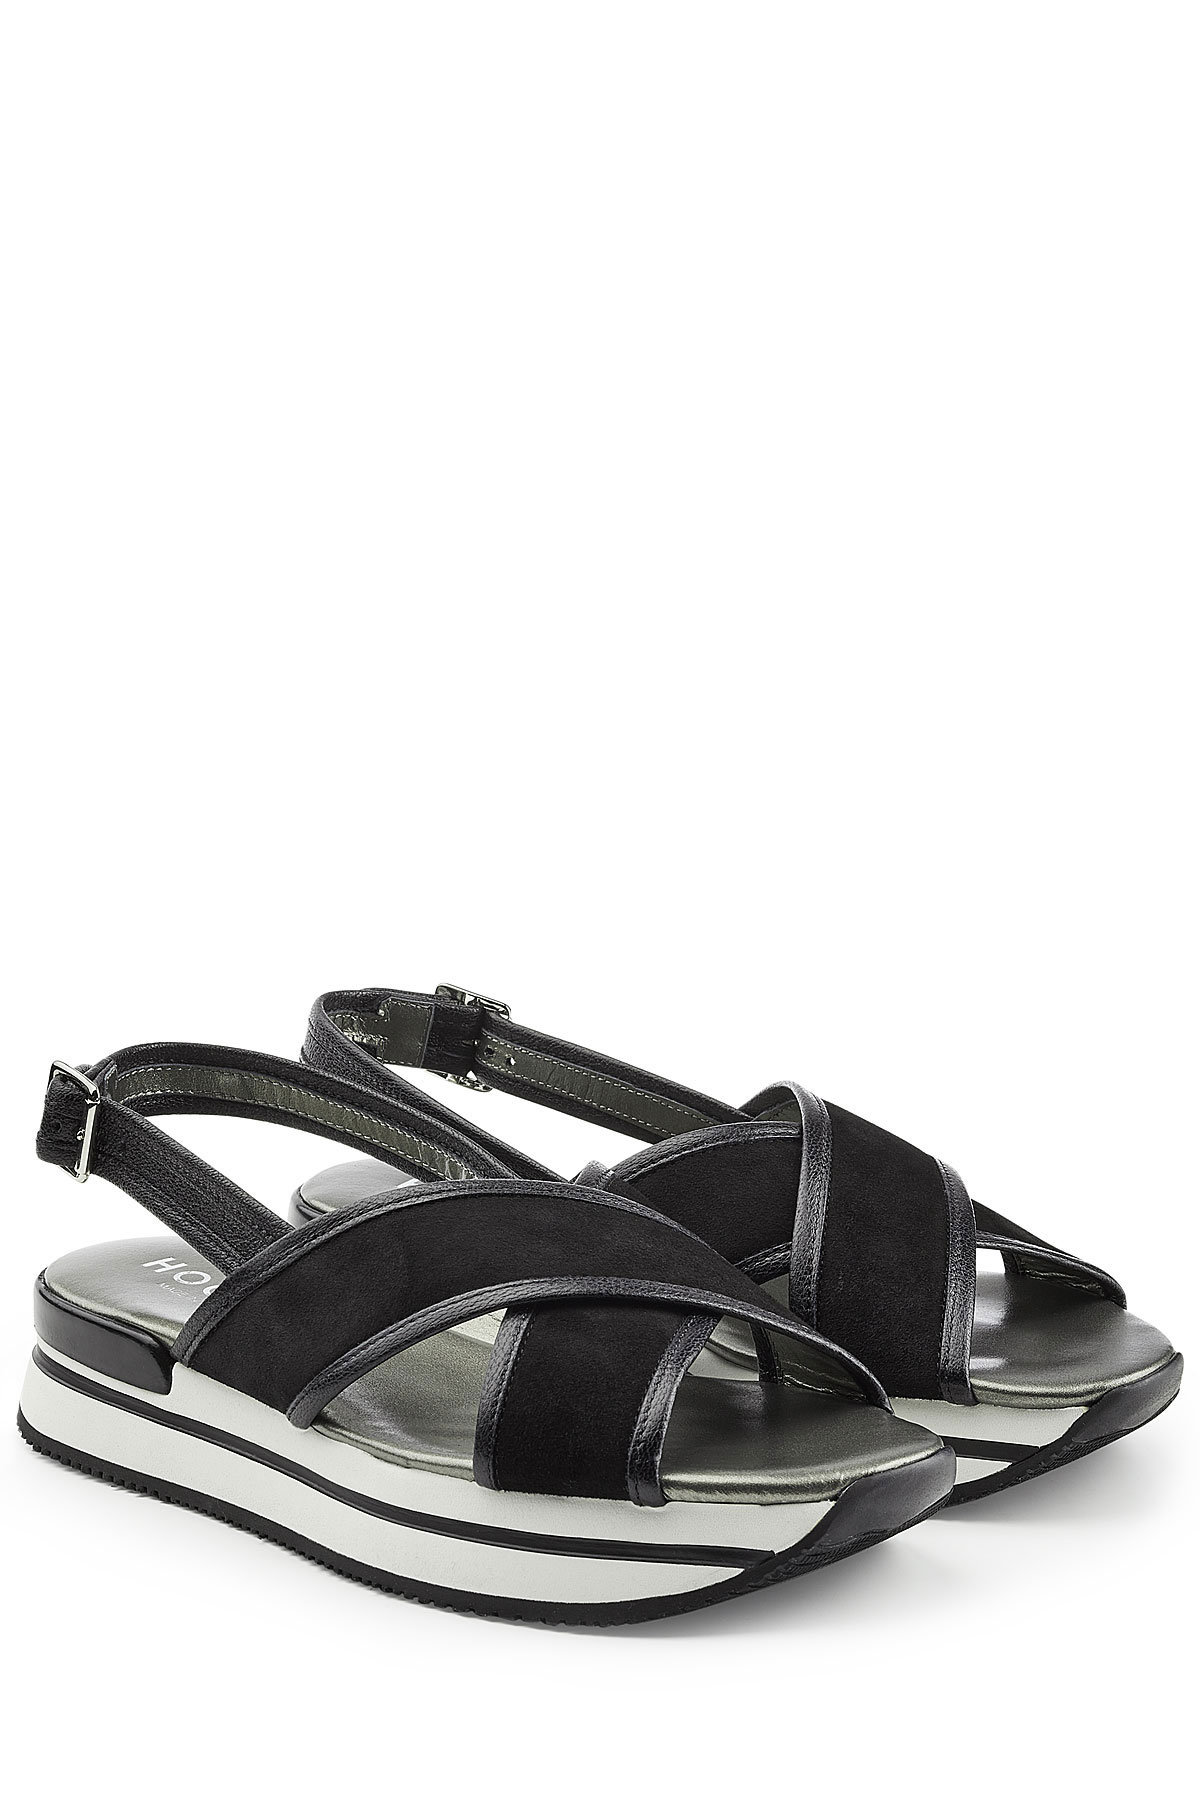 Hogan - Platform Sandals with Leather and Suede